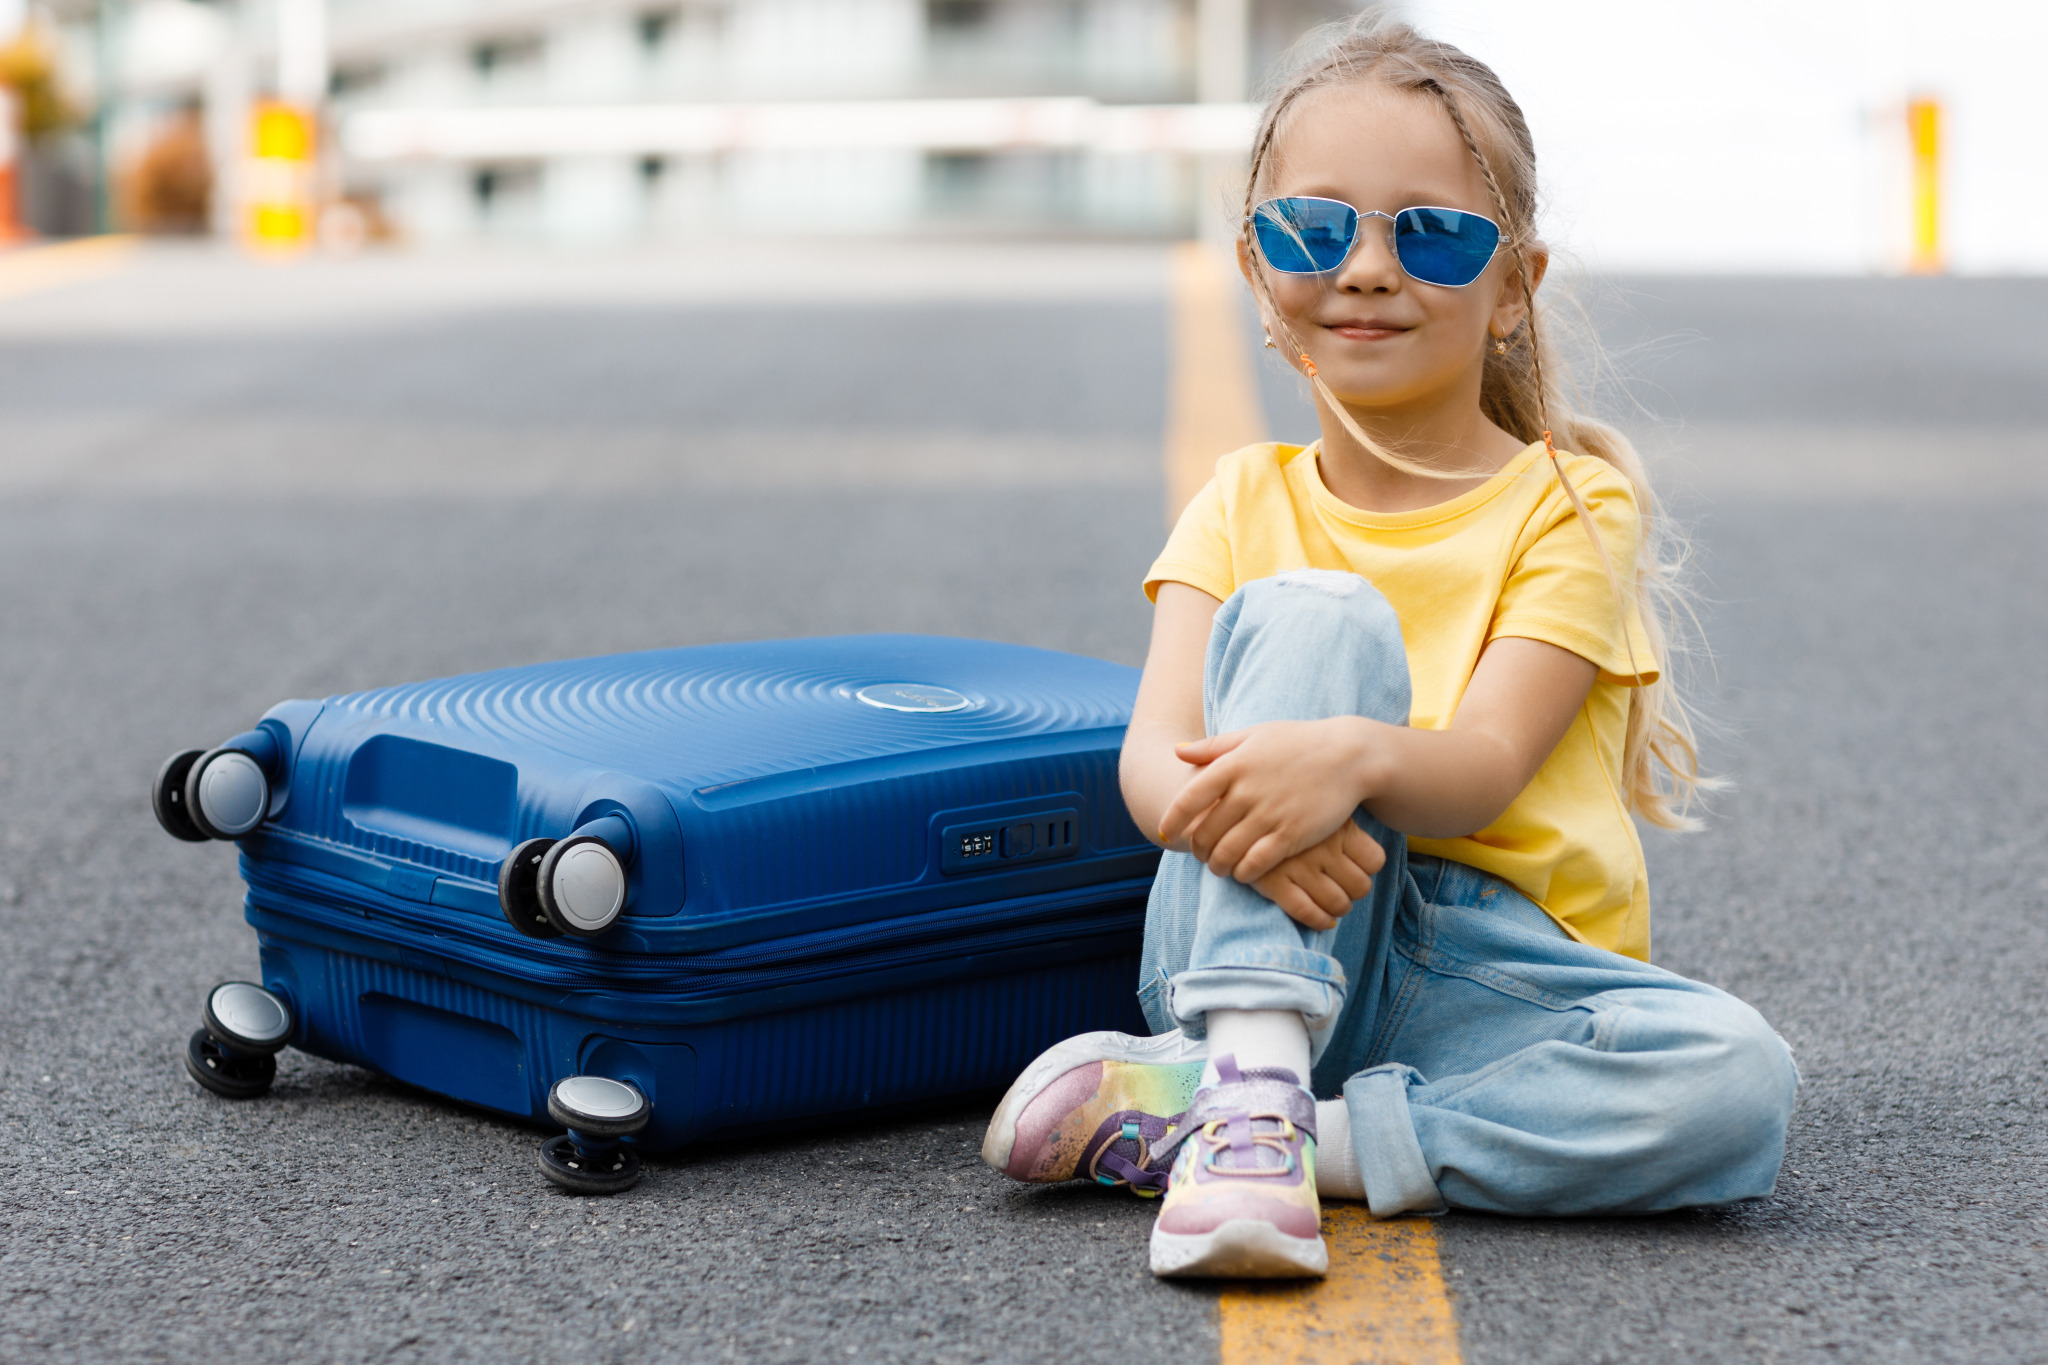 cute-little-girl-with-suitcase-outdoor